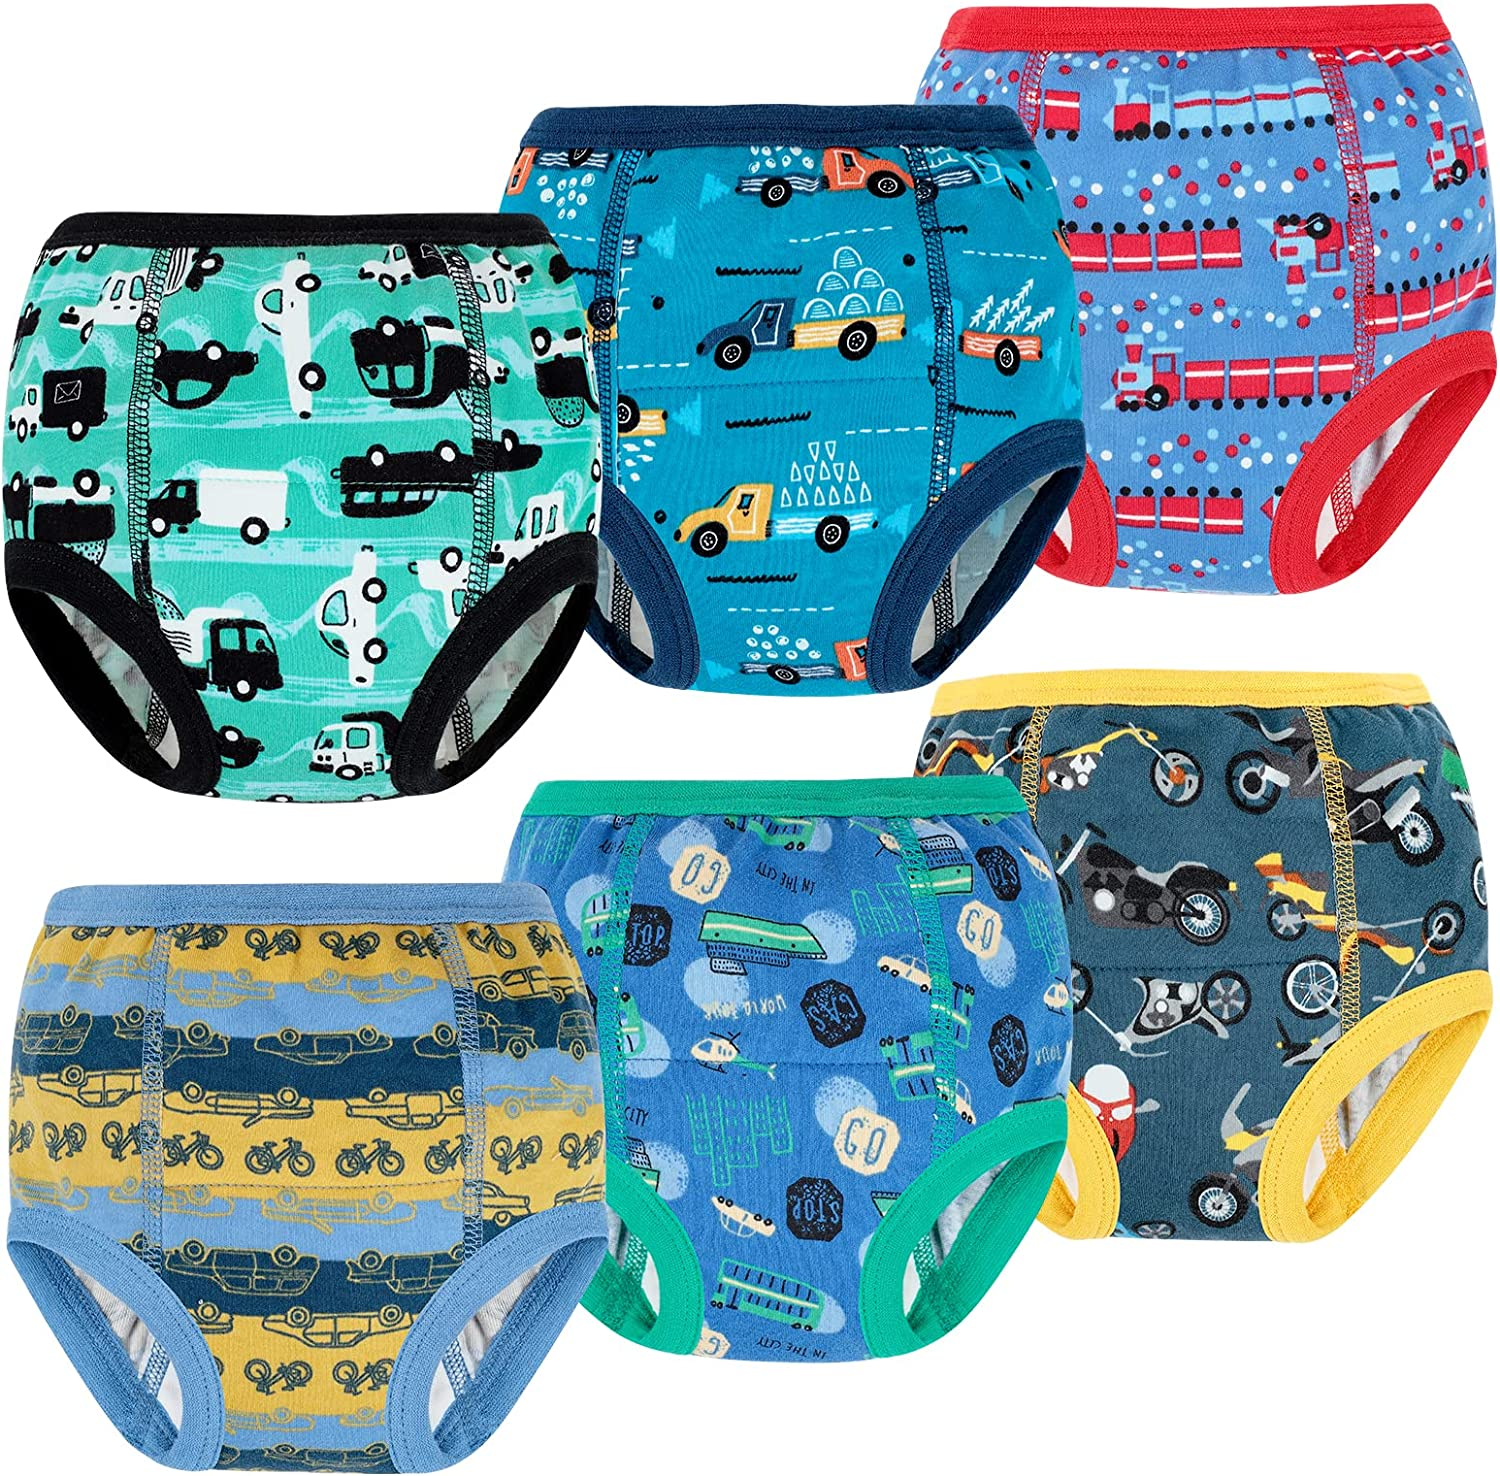 Moomoo Baby Potty Training Pants Absorbent Vehicle Training Pants for  Toddler Boys 6 Packs 5T